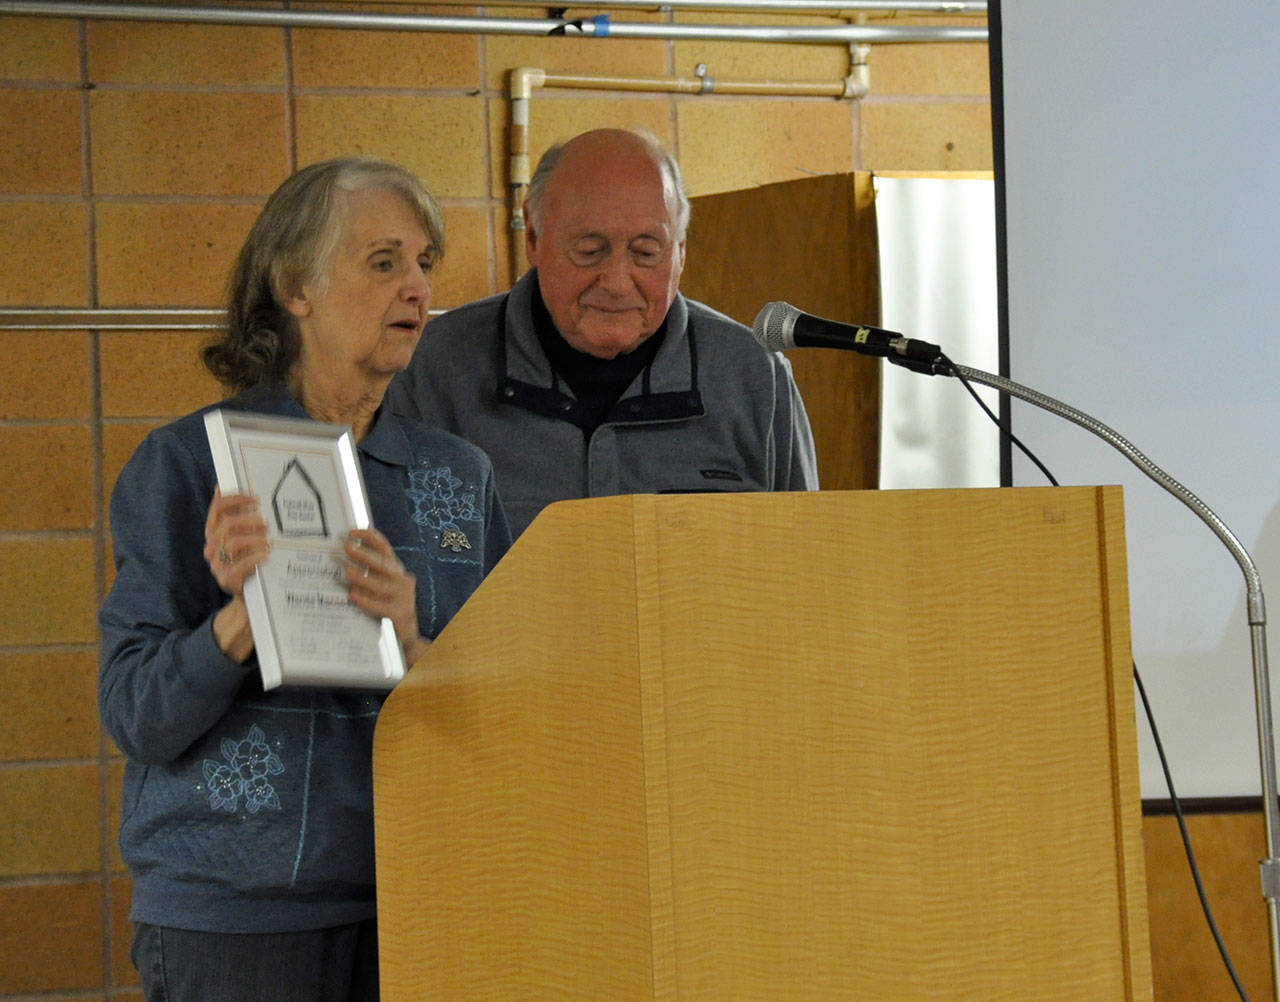 Wanda Manseau, left, receives an award for her service to the Federal Way Day Center, as Ron Secreto looks on. Heidi Sanders, the Mirror